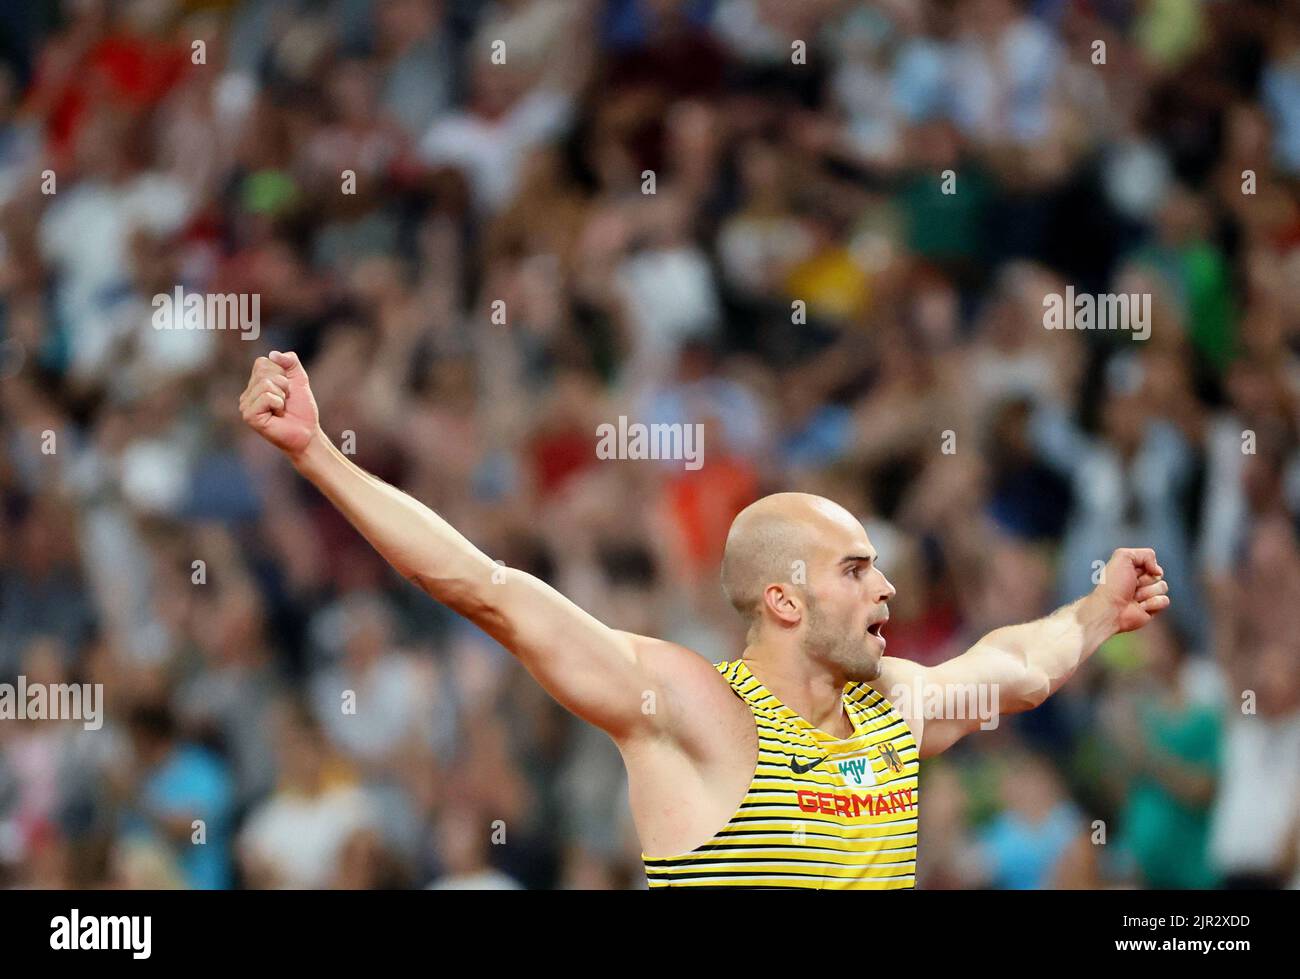 2022 European Championships - Athletics - Olympiastadion, Munich, Germany - August 21, 2022 Germany's Julian Weber reacts during the men's javelin throw final REUTERS/Wolfgang Rattay Stock Photo